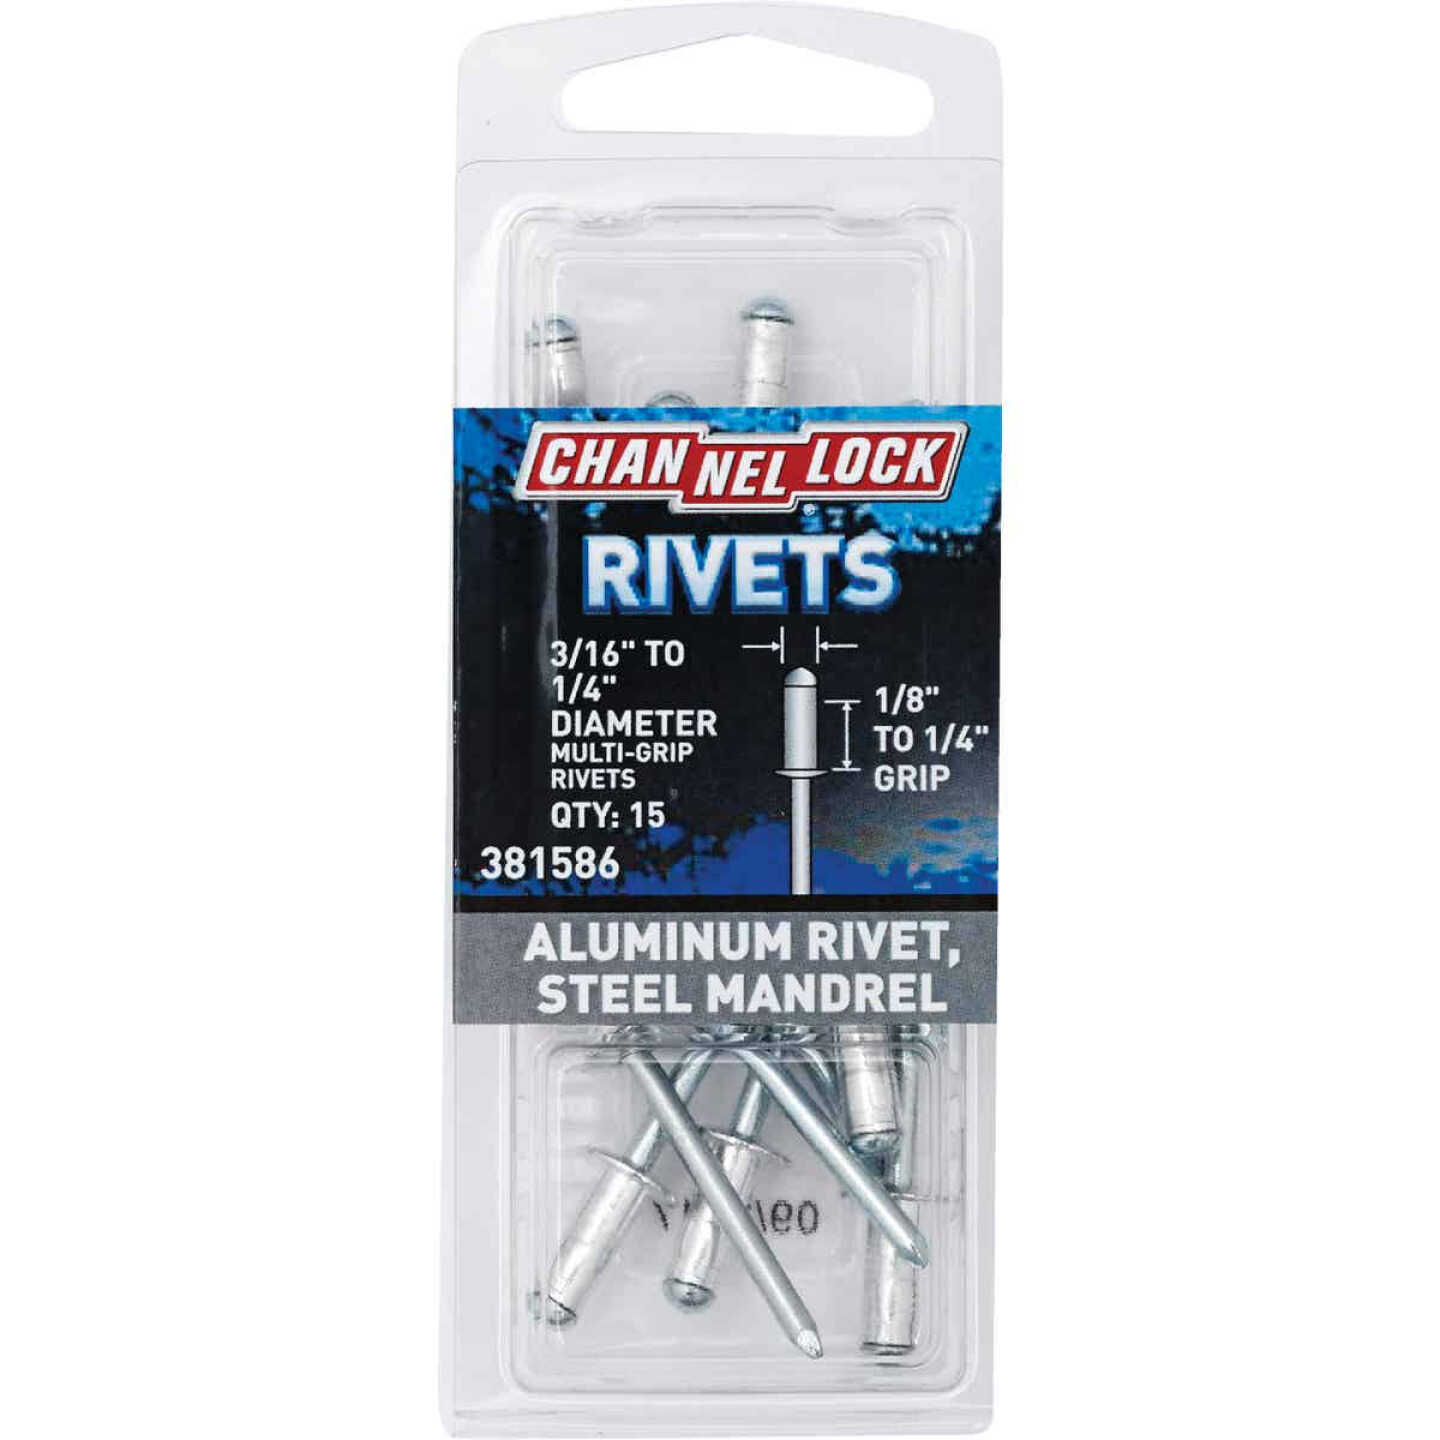 Channellock 3/16 In. to 1/4 In. Dia. x 0.063 In. to 0.250 In. Grip Aluminum POP Rivet (15-Pack). 381586